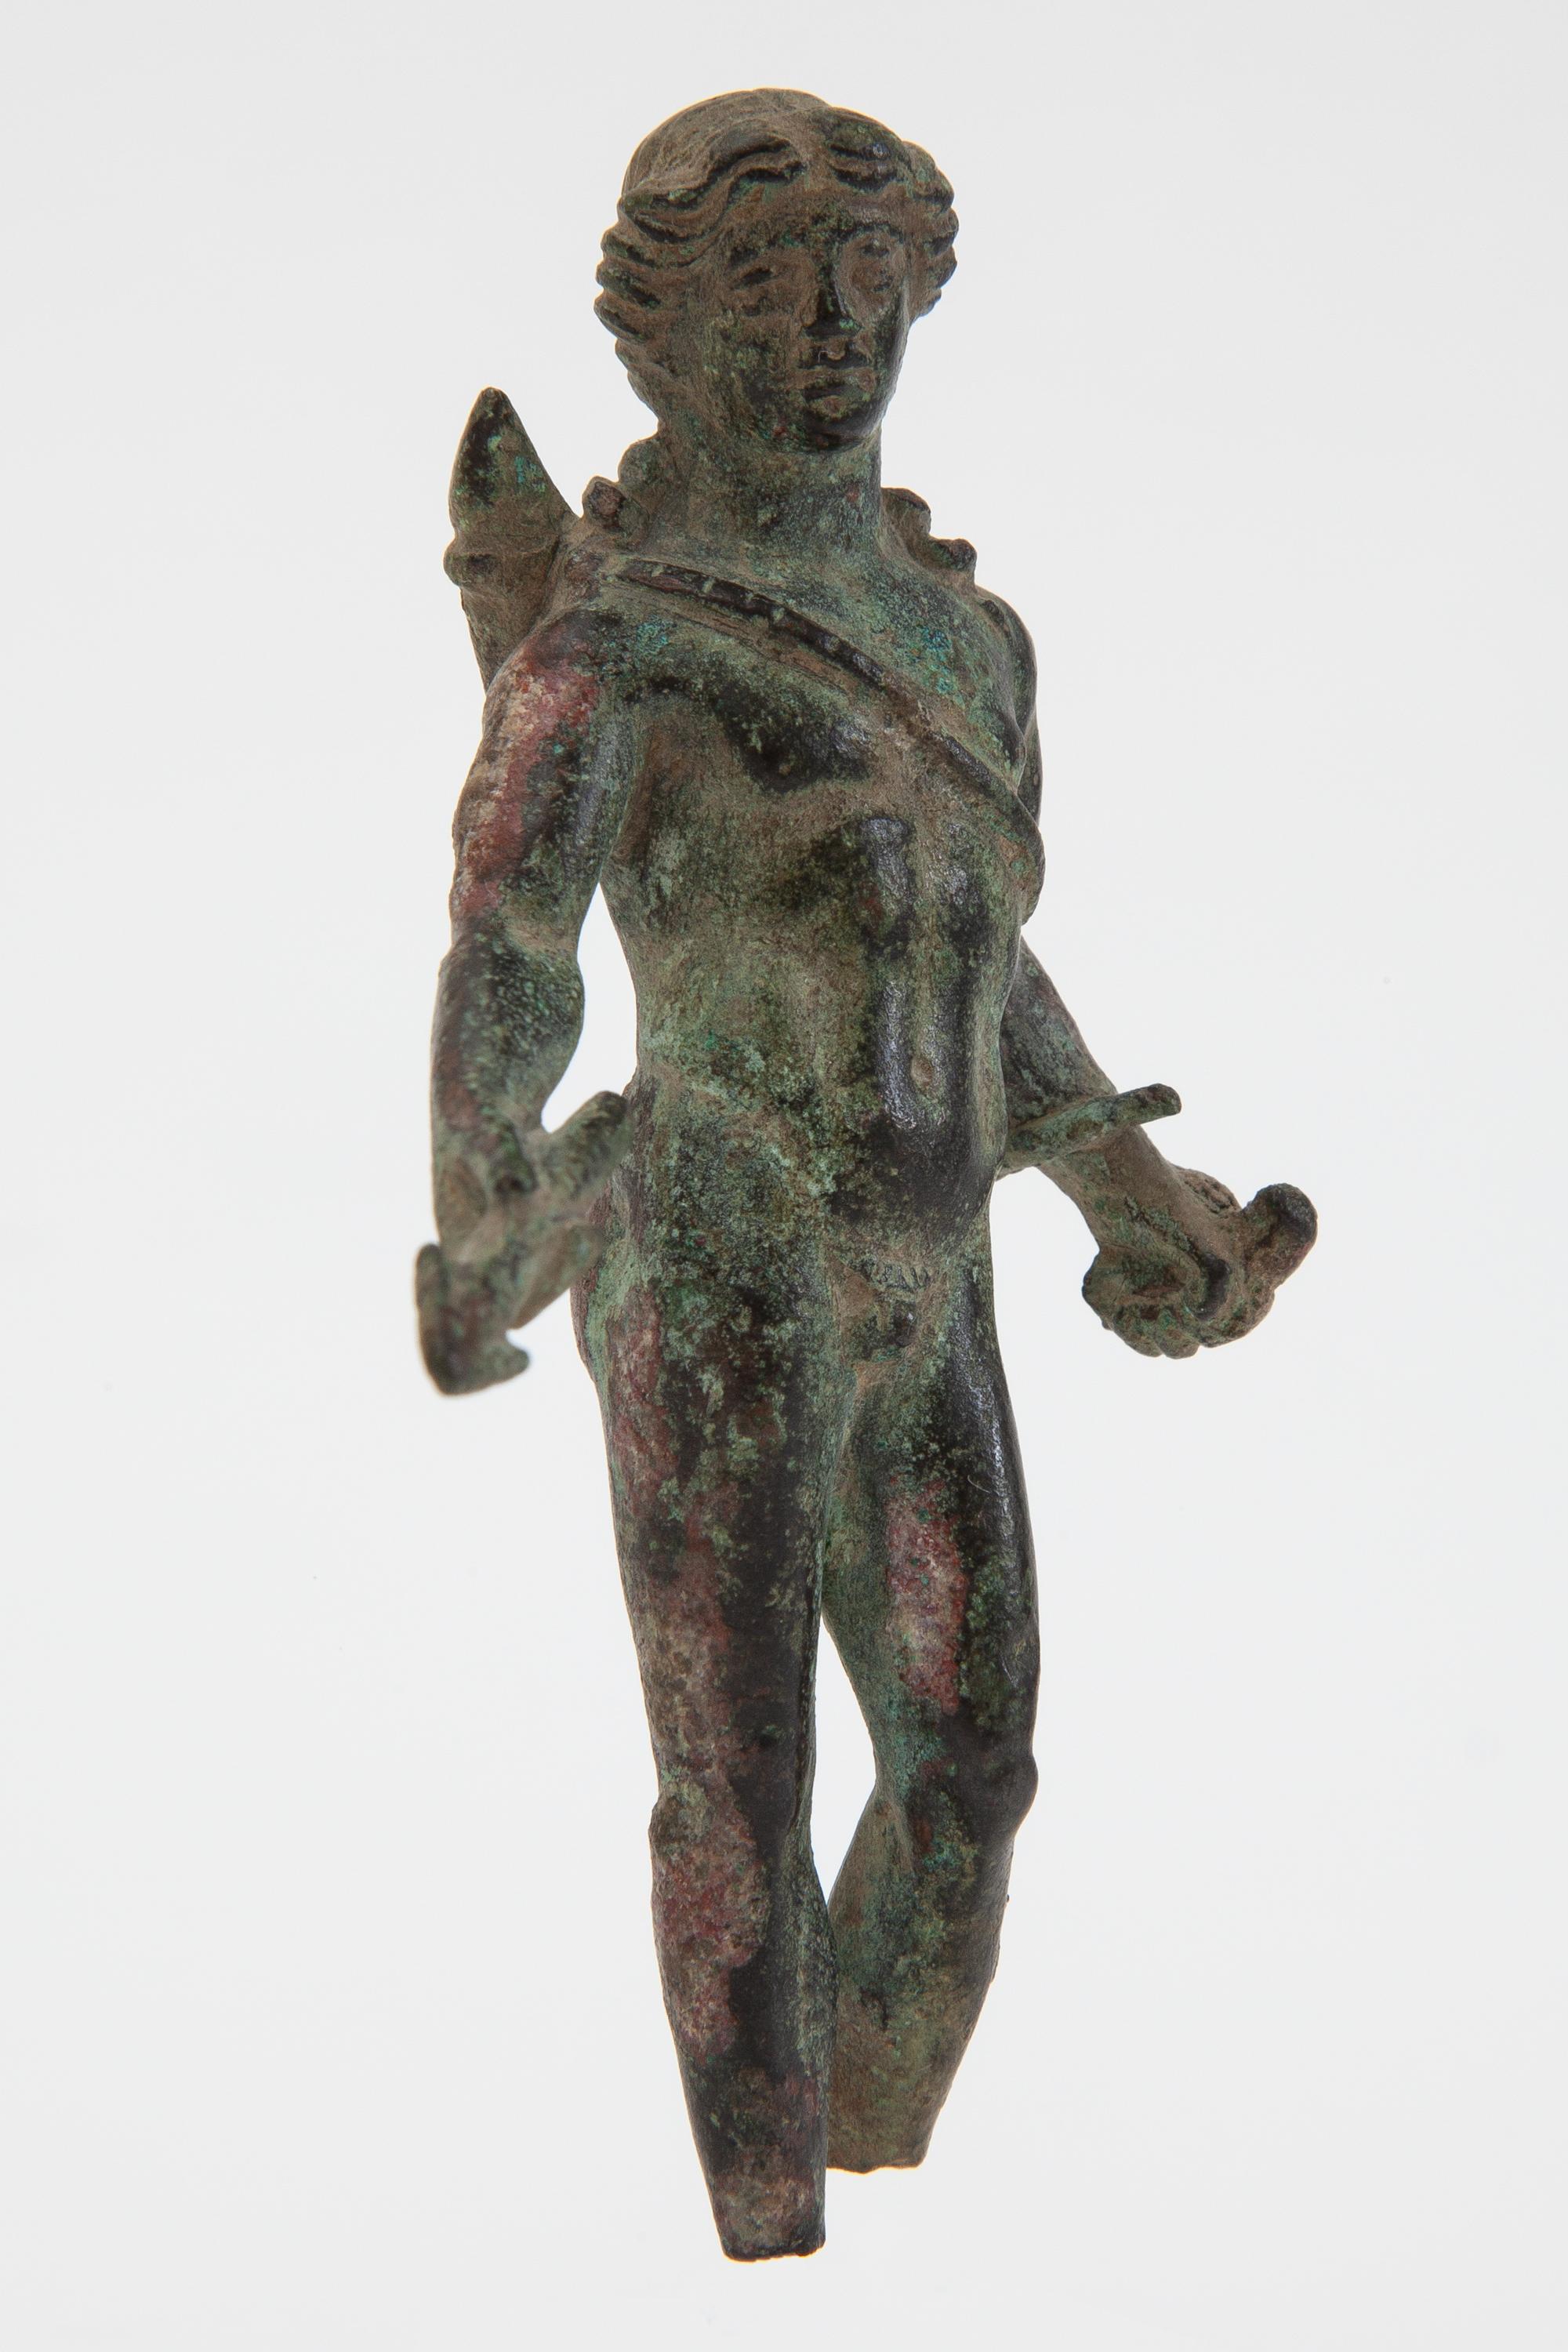 Well preserved Roman, bronze figure of Apollo with authentic patina of age. Executed as “the Hunter of Souls” with arrow, quiver and bow.
Apollo, God of transformation, prophecy, healing, light, poetry, music, magic, purification, death. Hunter of